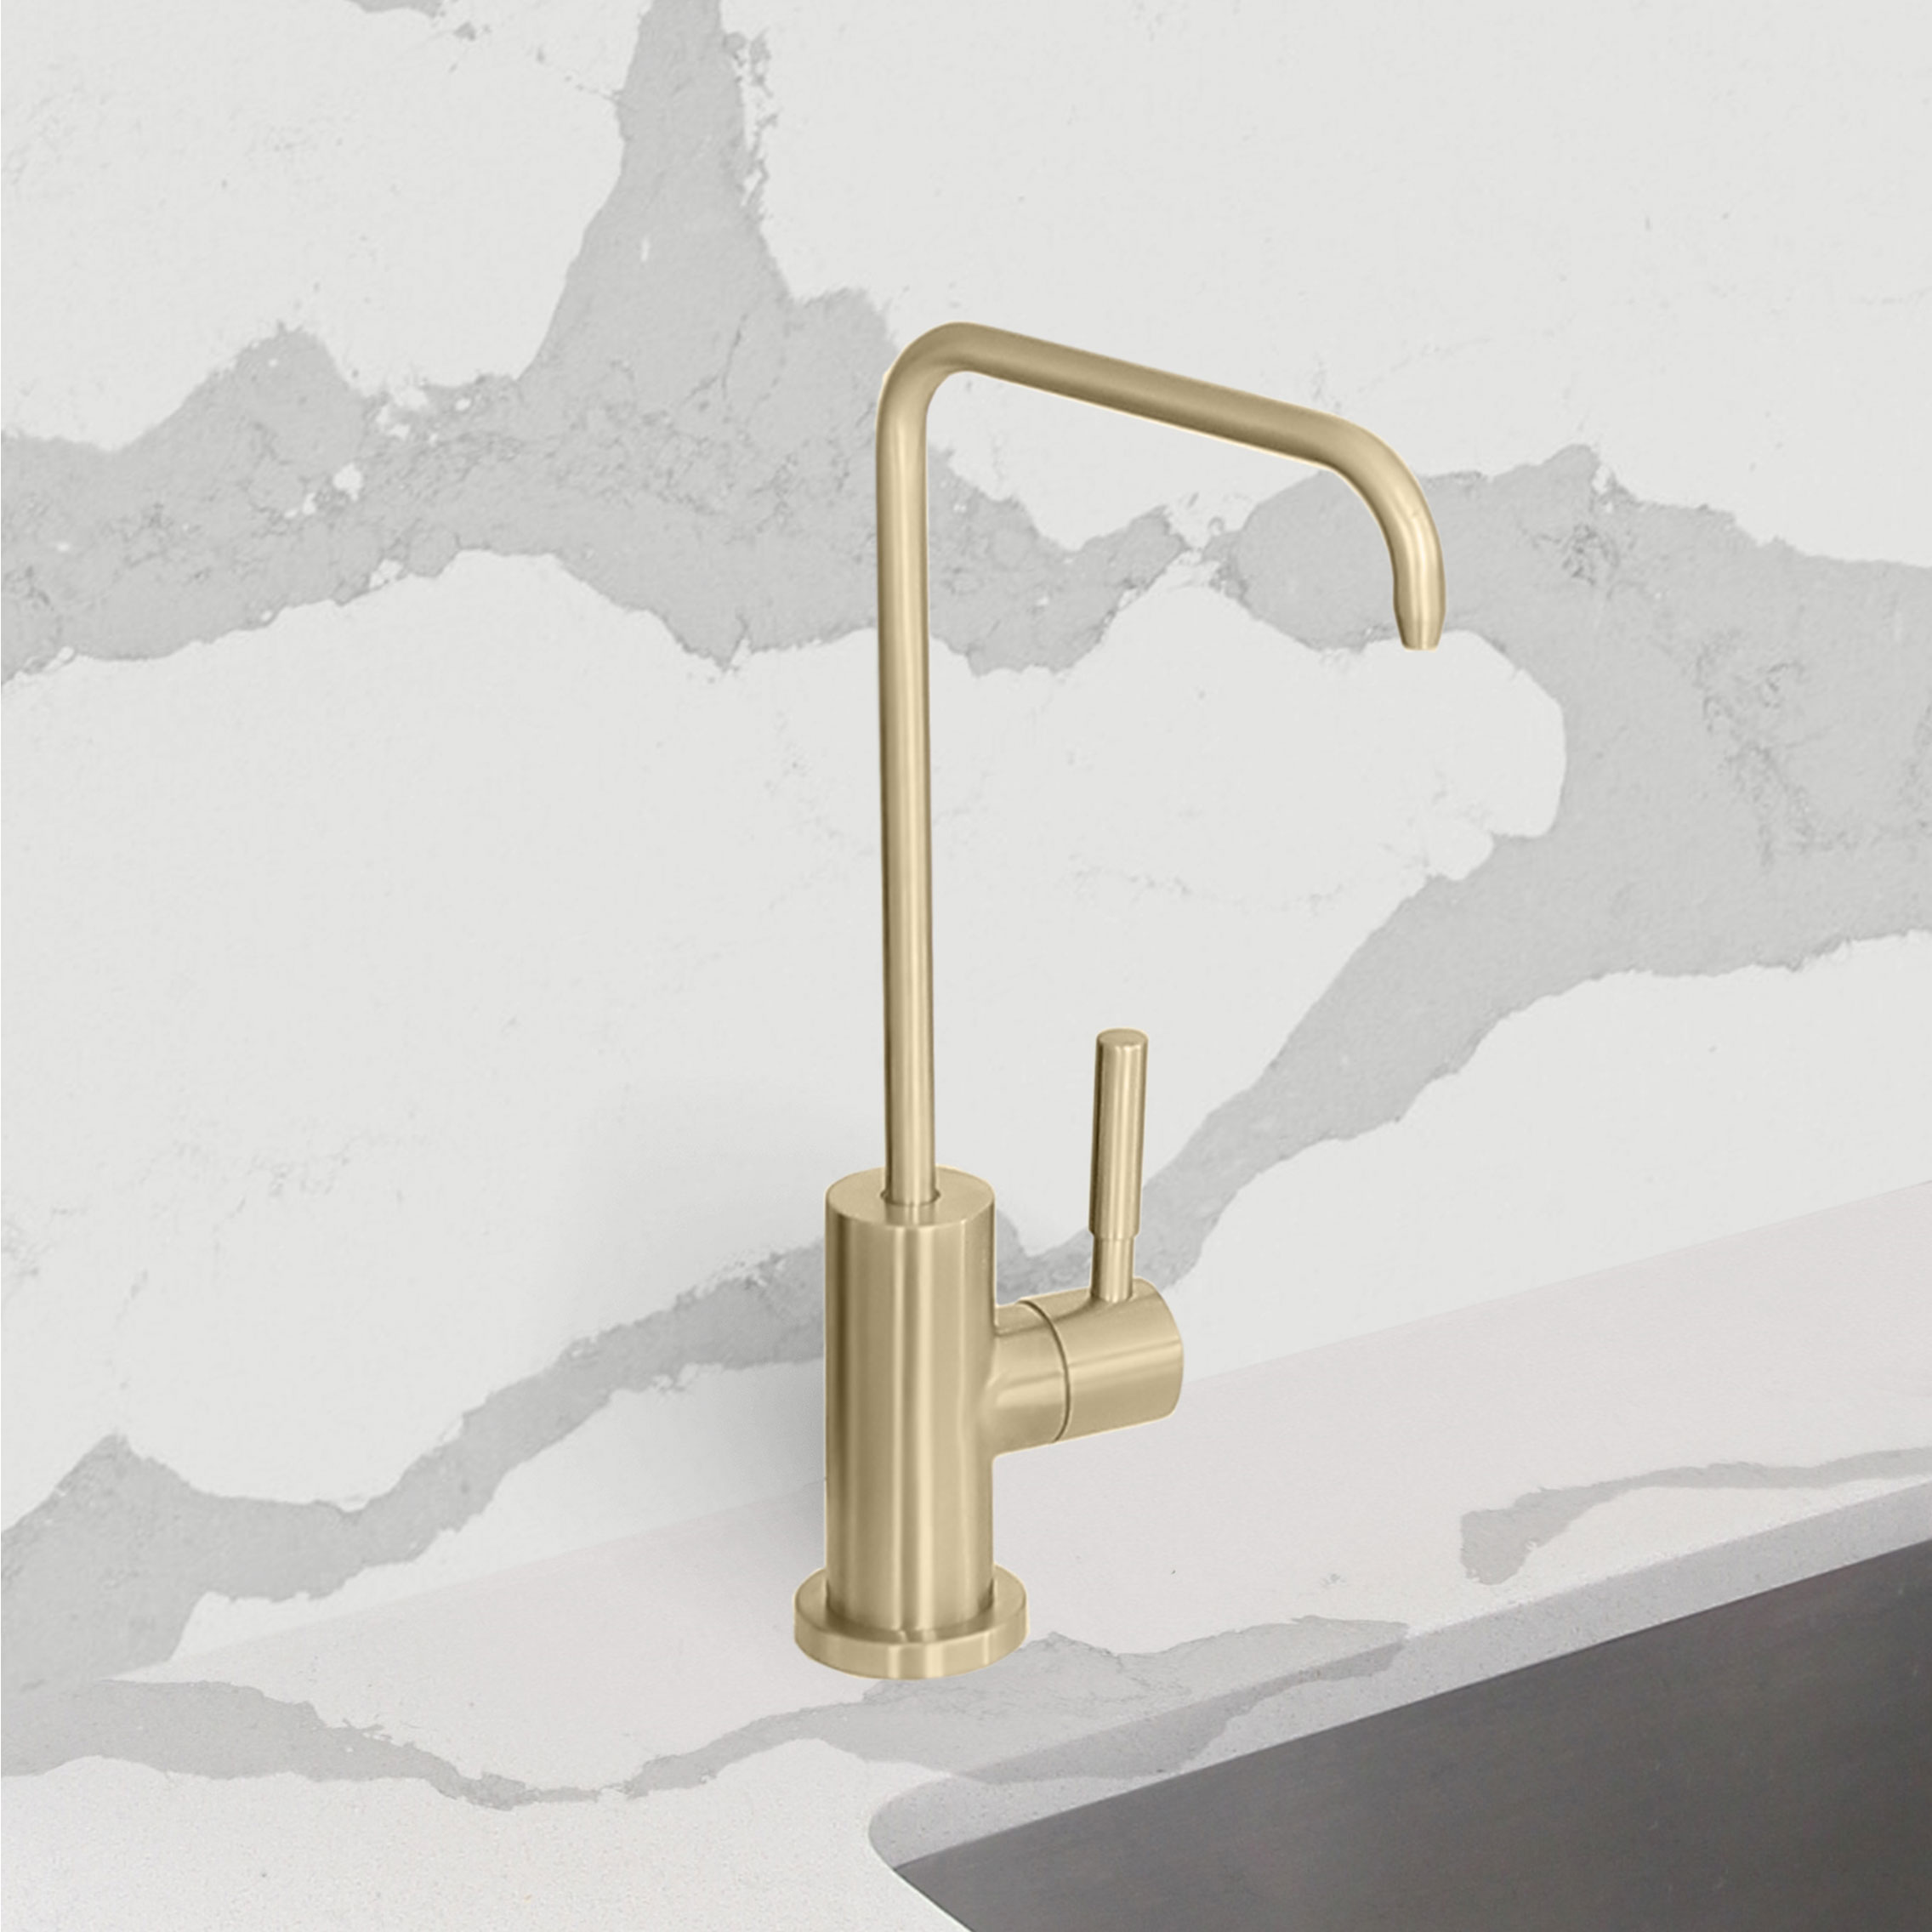 Single Handle Cold Water Tap - Stainless Steel Brushed Gold Finish by Stylish® K-147G